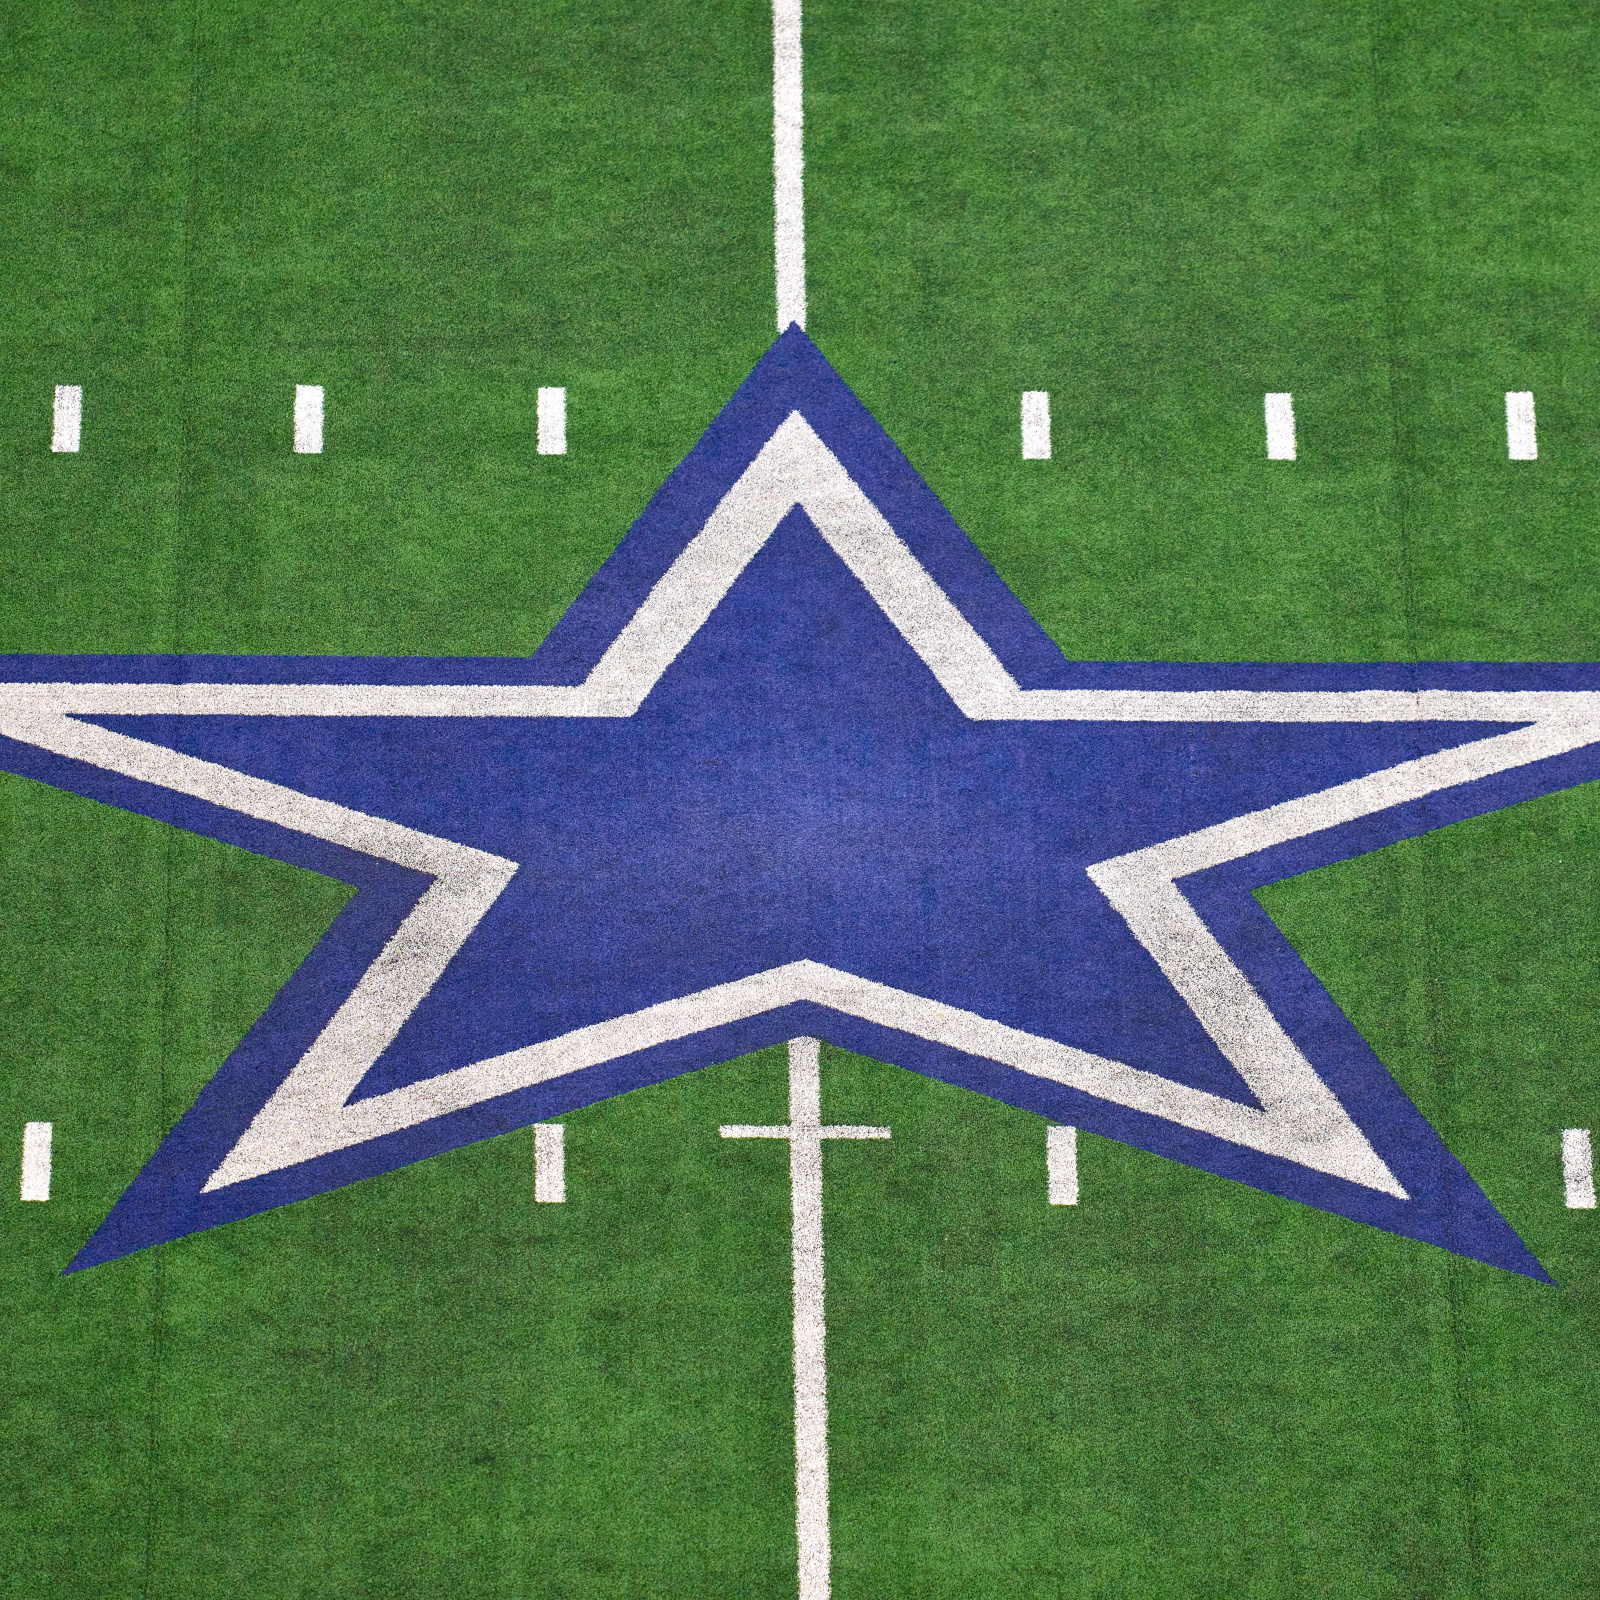 ESPN and Rich Dalrymple report: Cowboys paid $2.4 million to settle  cheerleaders' 'voyeurism' allegations PR executive - Blogging The Boys